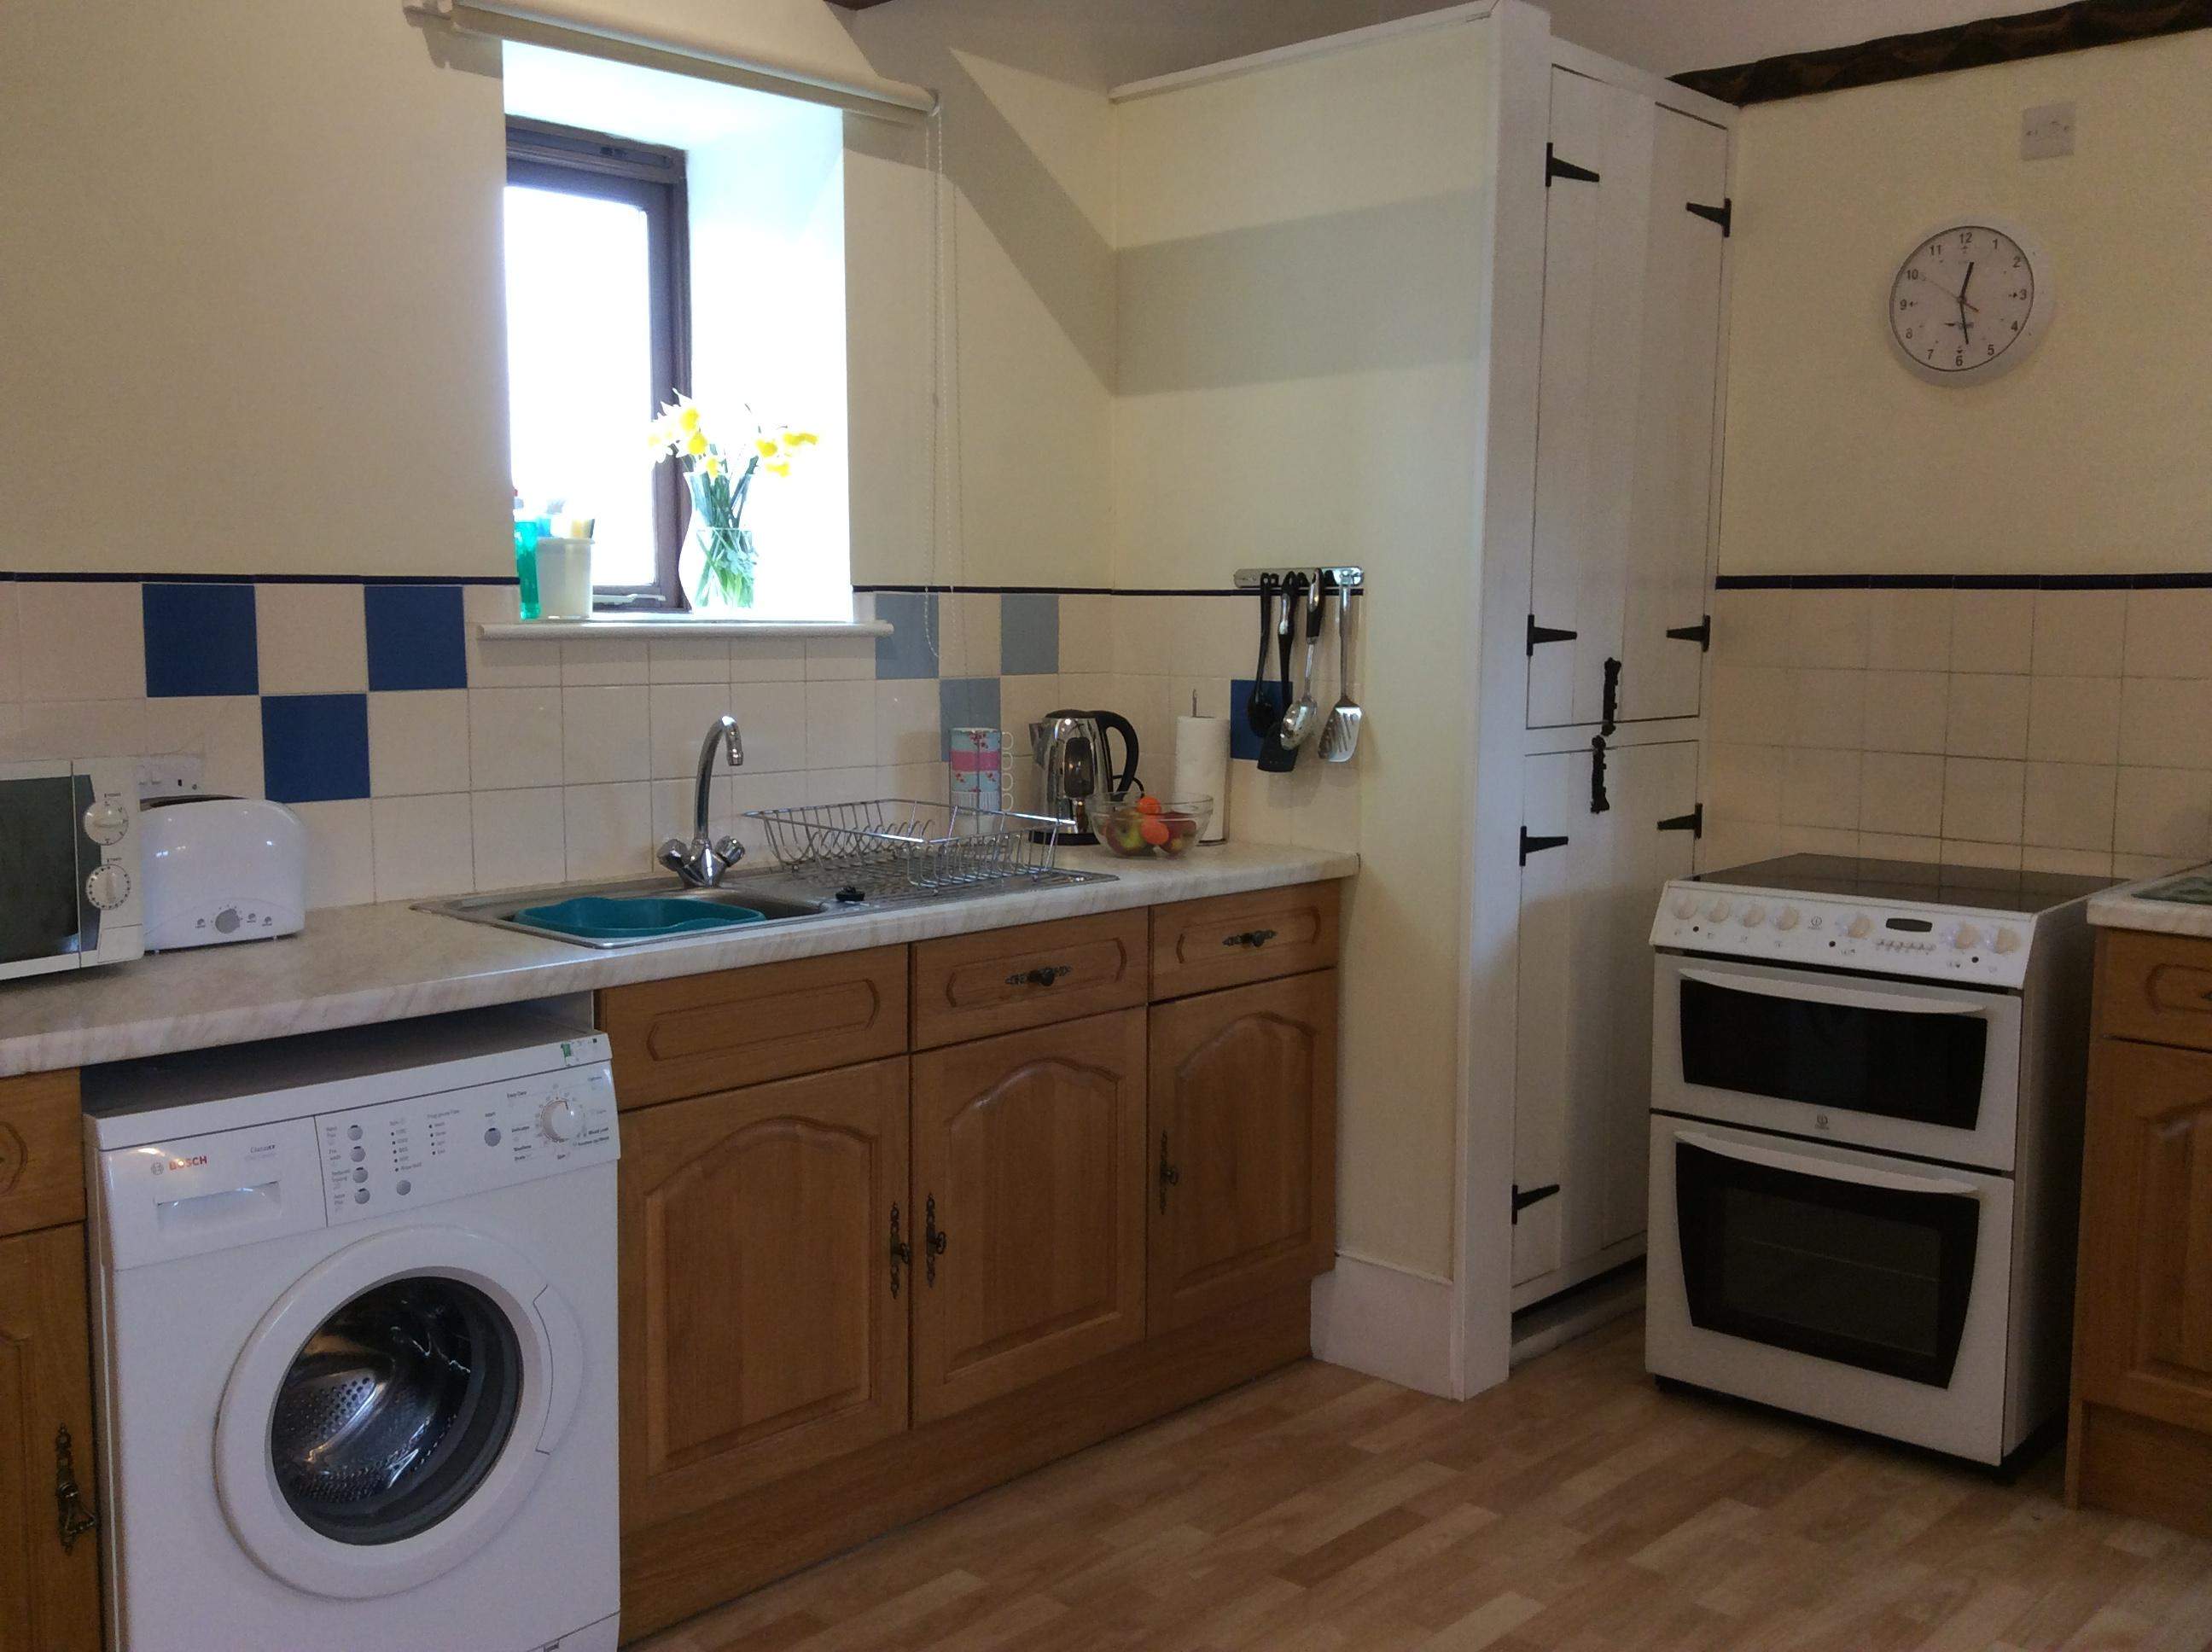 full size oven with ceramic hob and grill, microwave, full size fridge freezer, washing machine